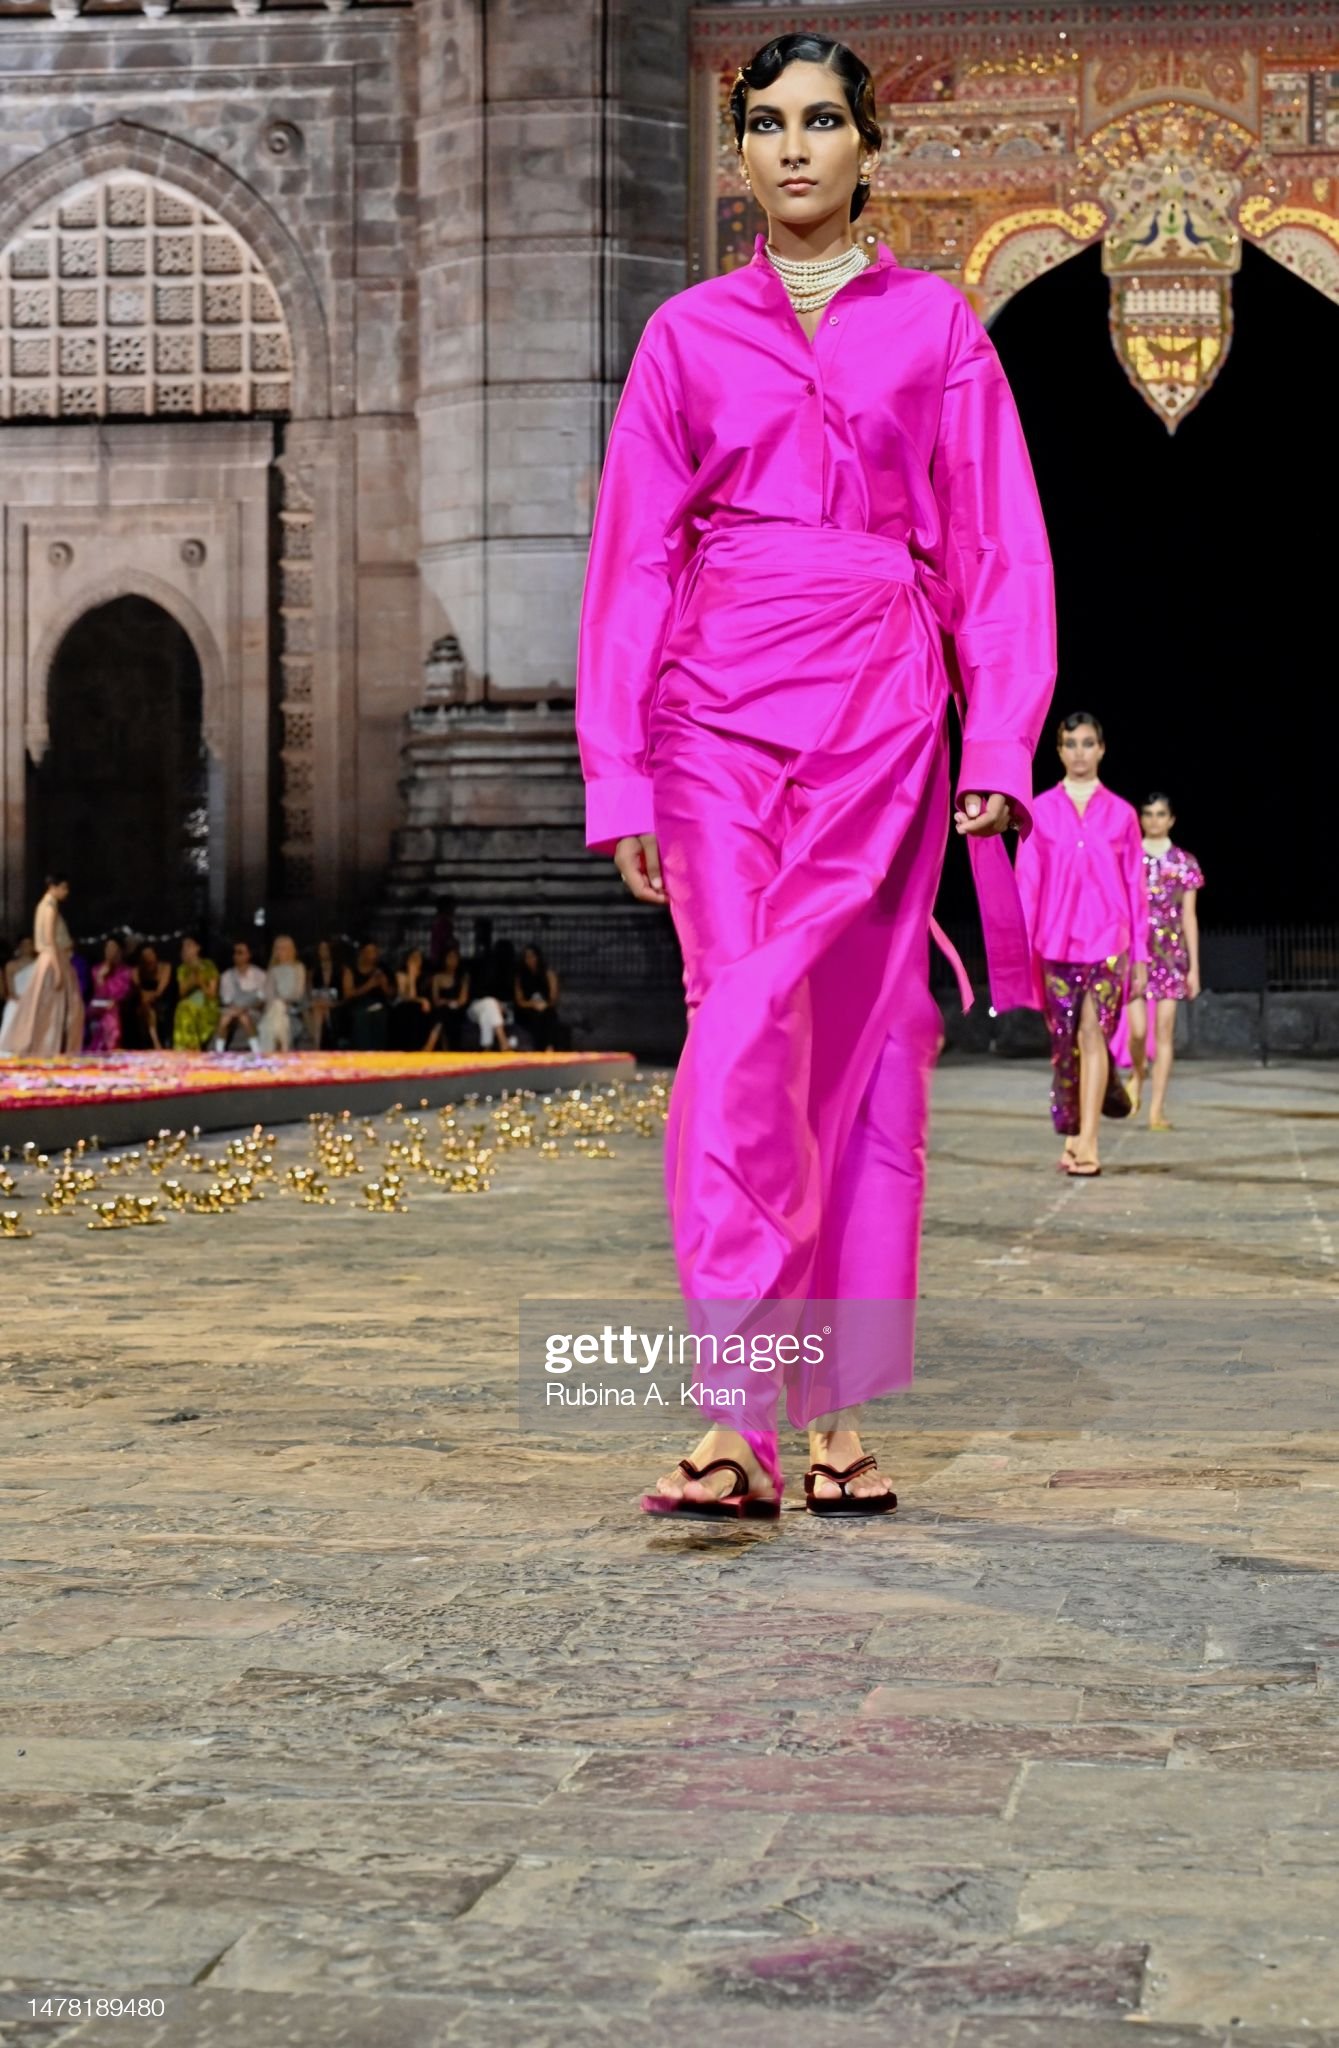 Dior Fall 2023 Show, It's nearly time for the Dior Fall 2023 collection by  Maria Grazia Chiuri, set to be unveiled at the historic Gateway of India,  Mumbai, on March 30, 2023, By Dior